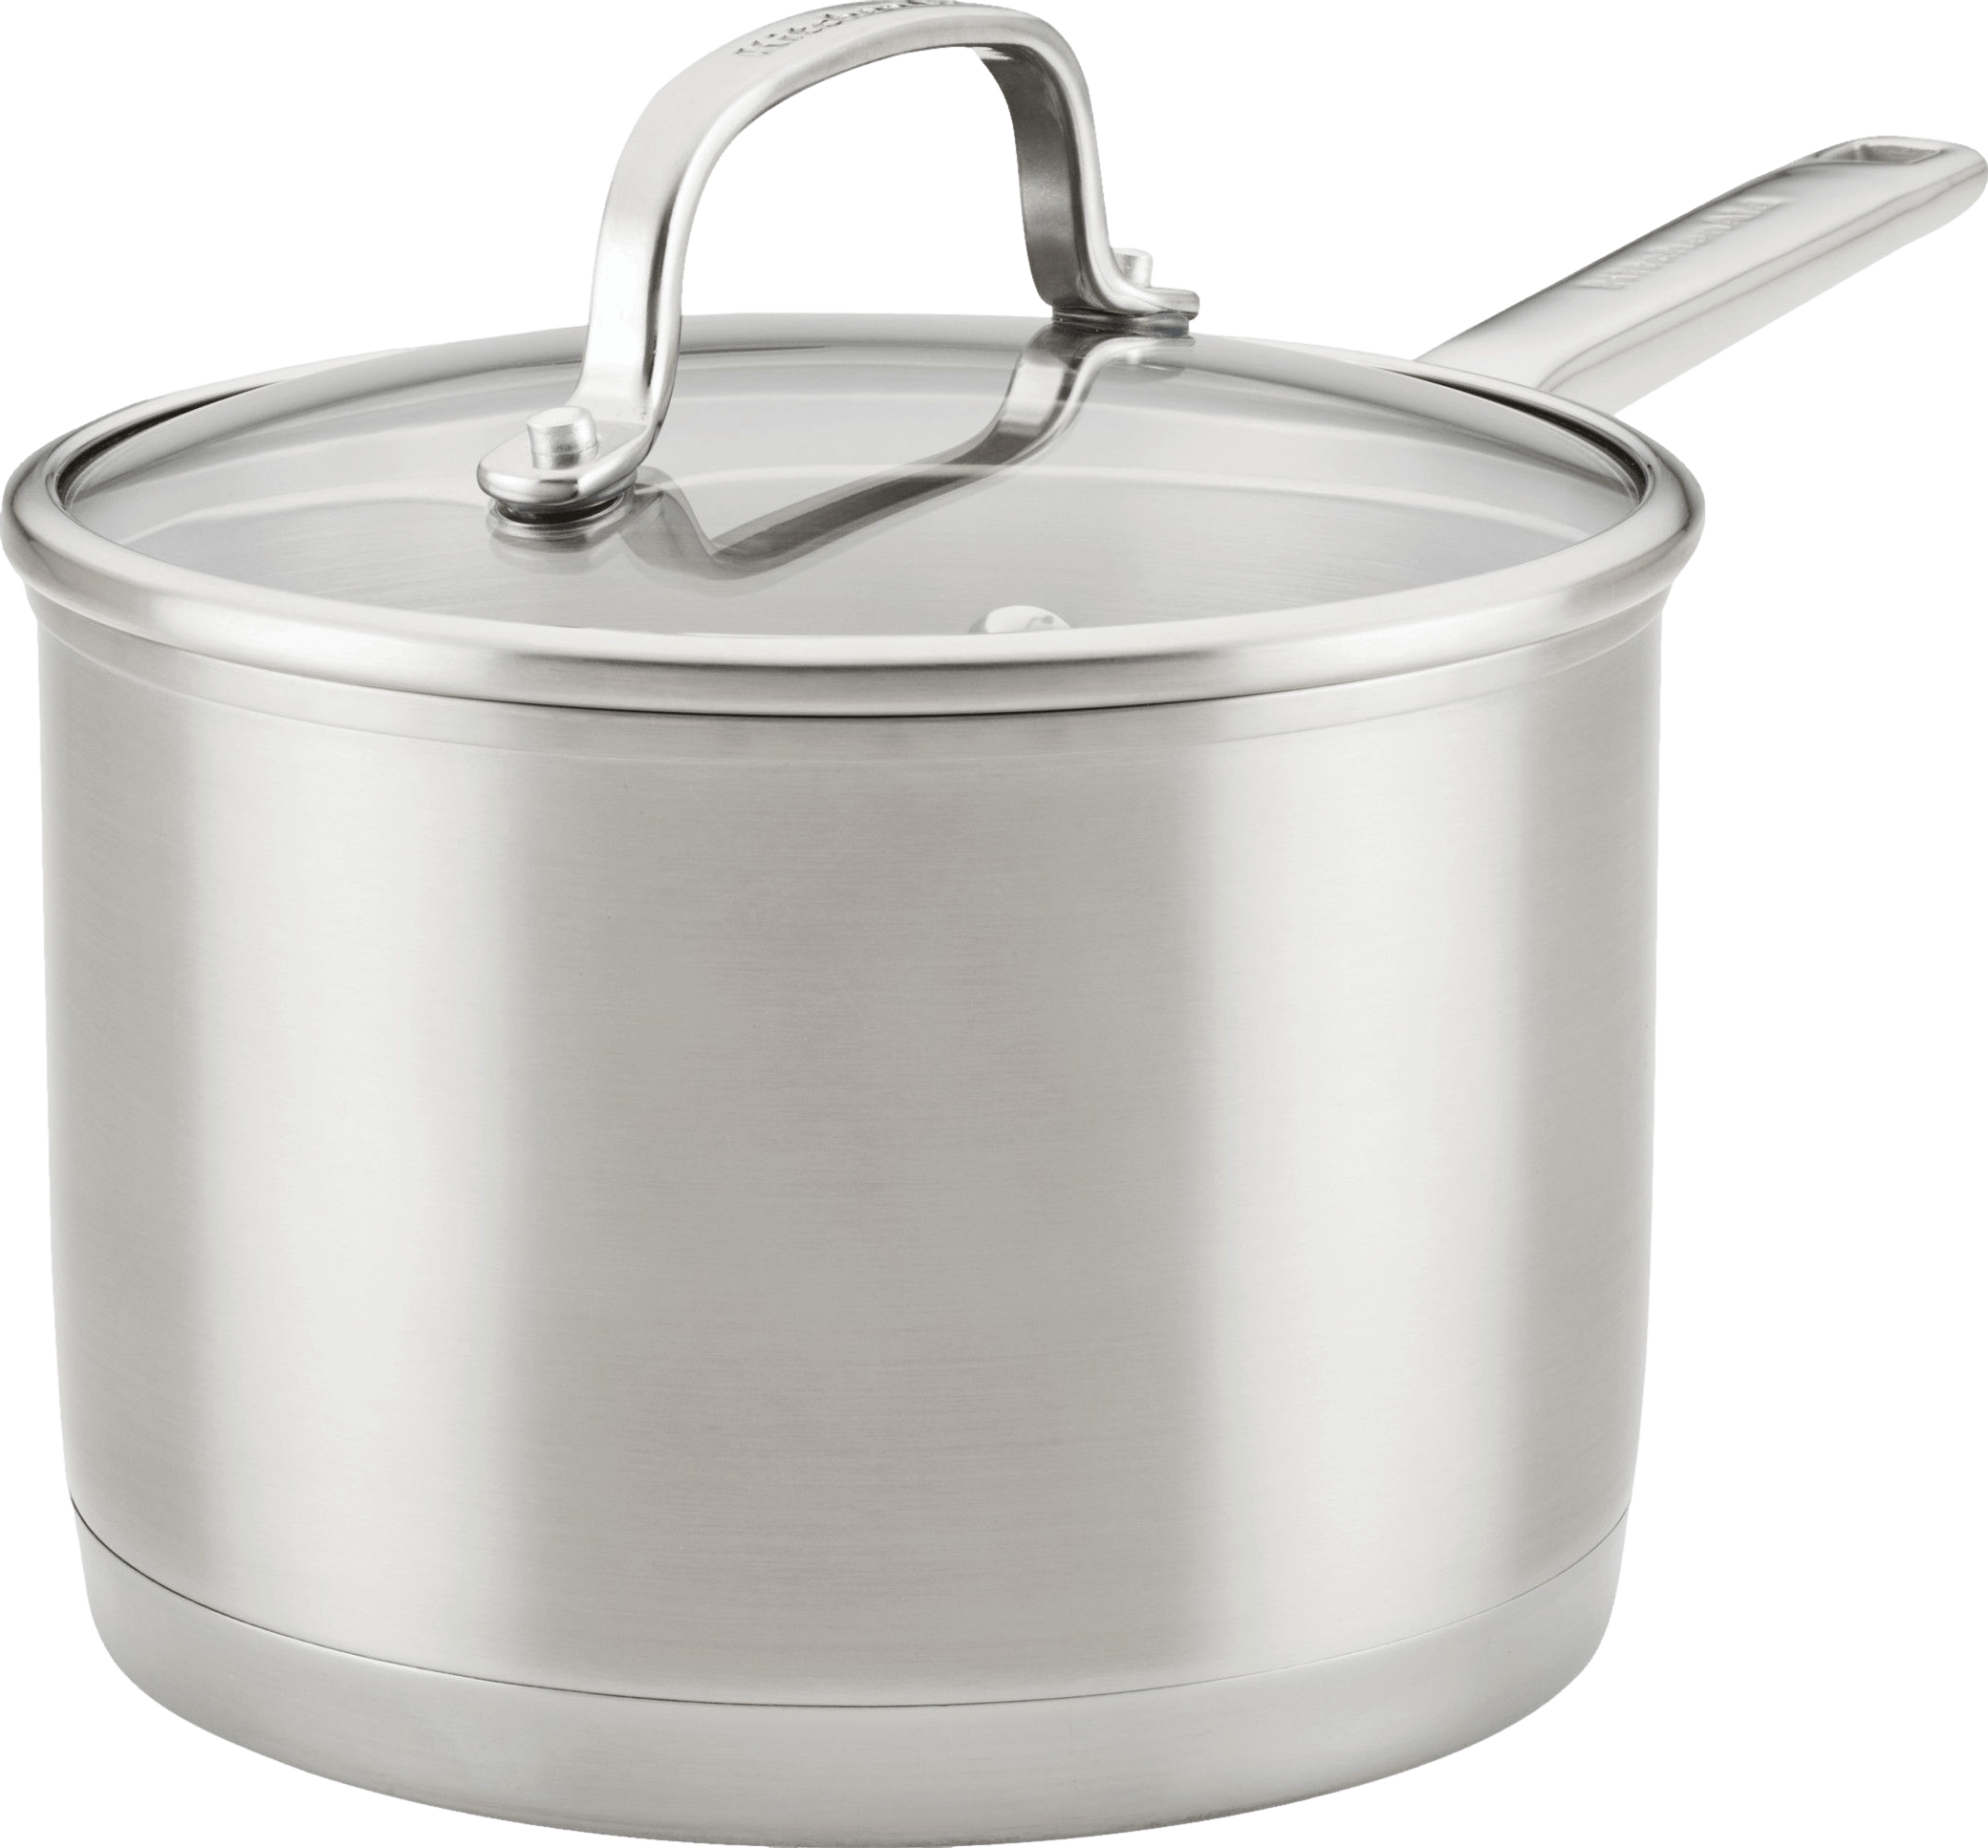 KitchenAid 3-Ply Base Stainless Steel Induction Saucepan with Lid, 3-Quart,  Brushed Stainless Steel